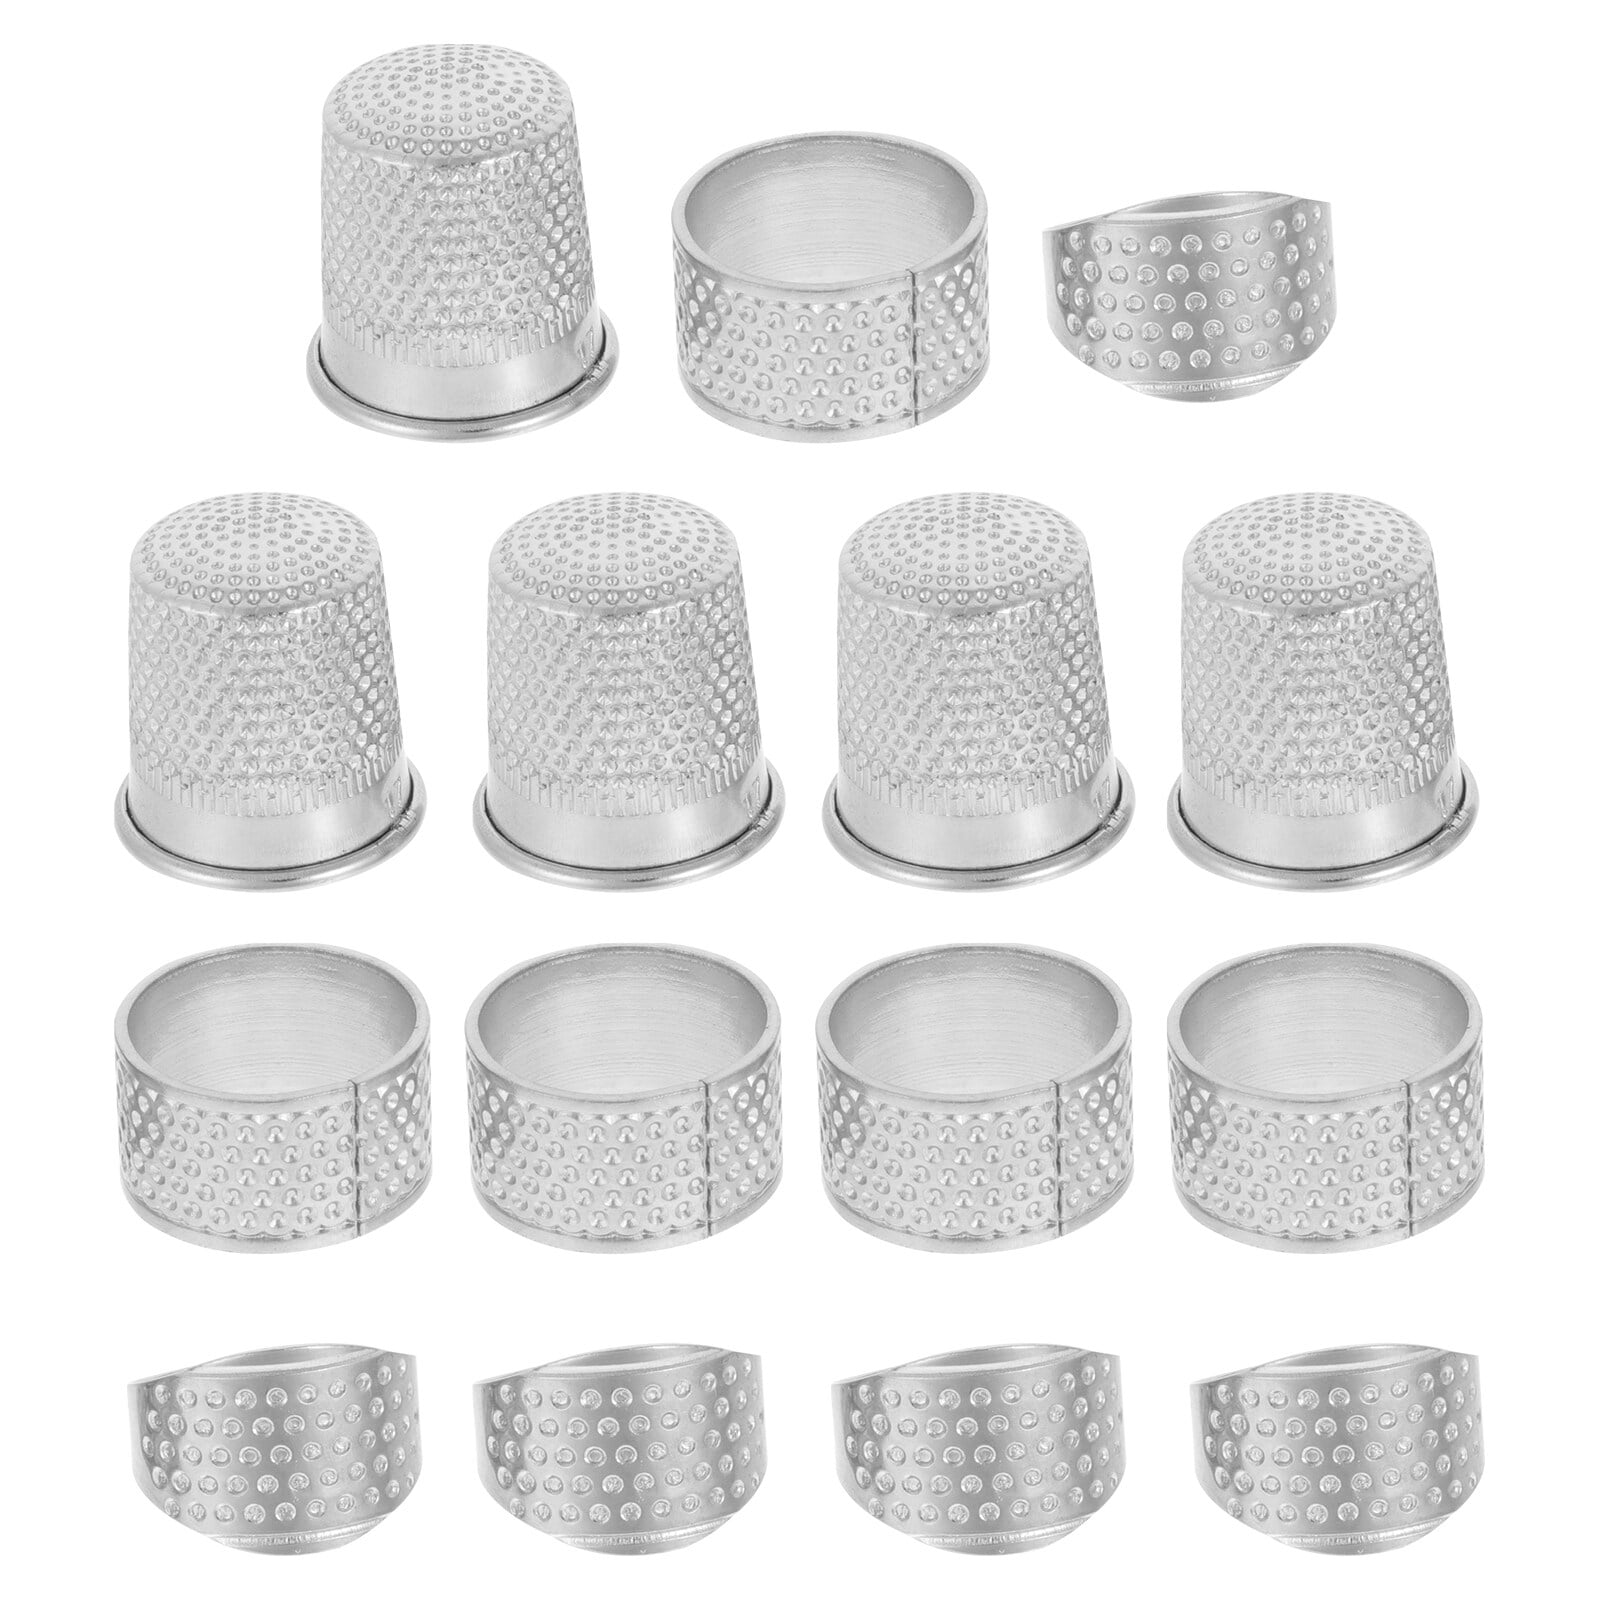 MXXGMYJ Magicw Vintage Sewing Thimble Finger Thimbles Metal Shield Sewing  Grip Protector Pin Needle Shield For Diy Crafts 10Pcs 12X13Mm - Magicw  Vintage Sewing Thimble Finger Thimbles Metal Shield Sewing Grip Protector